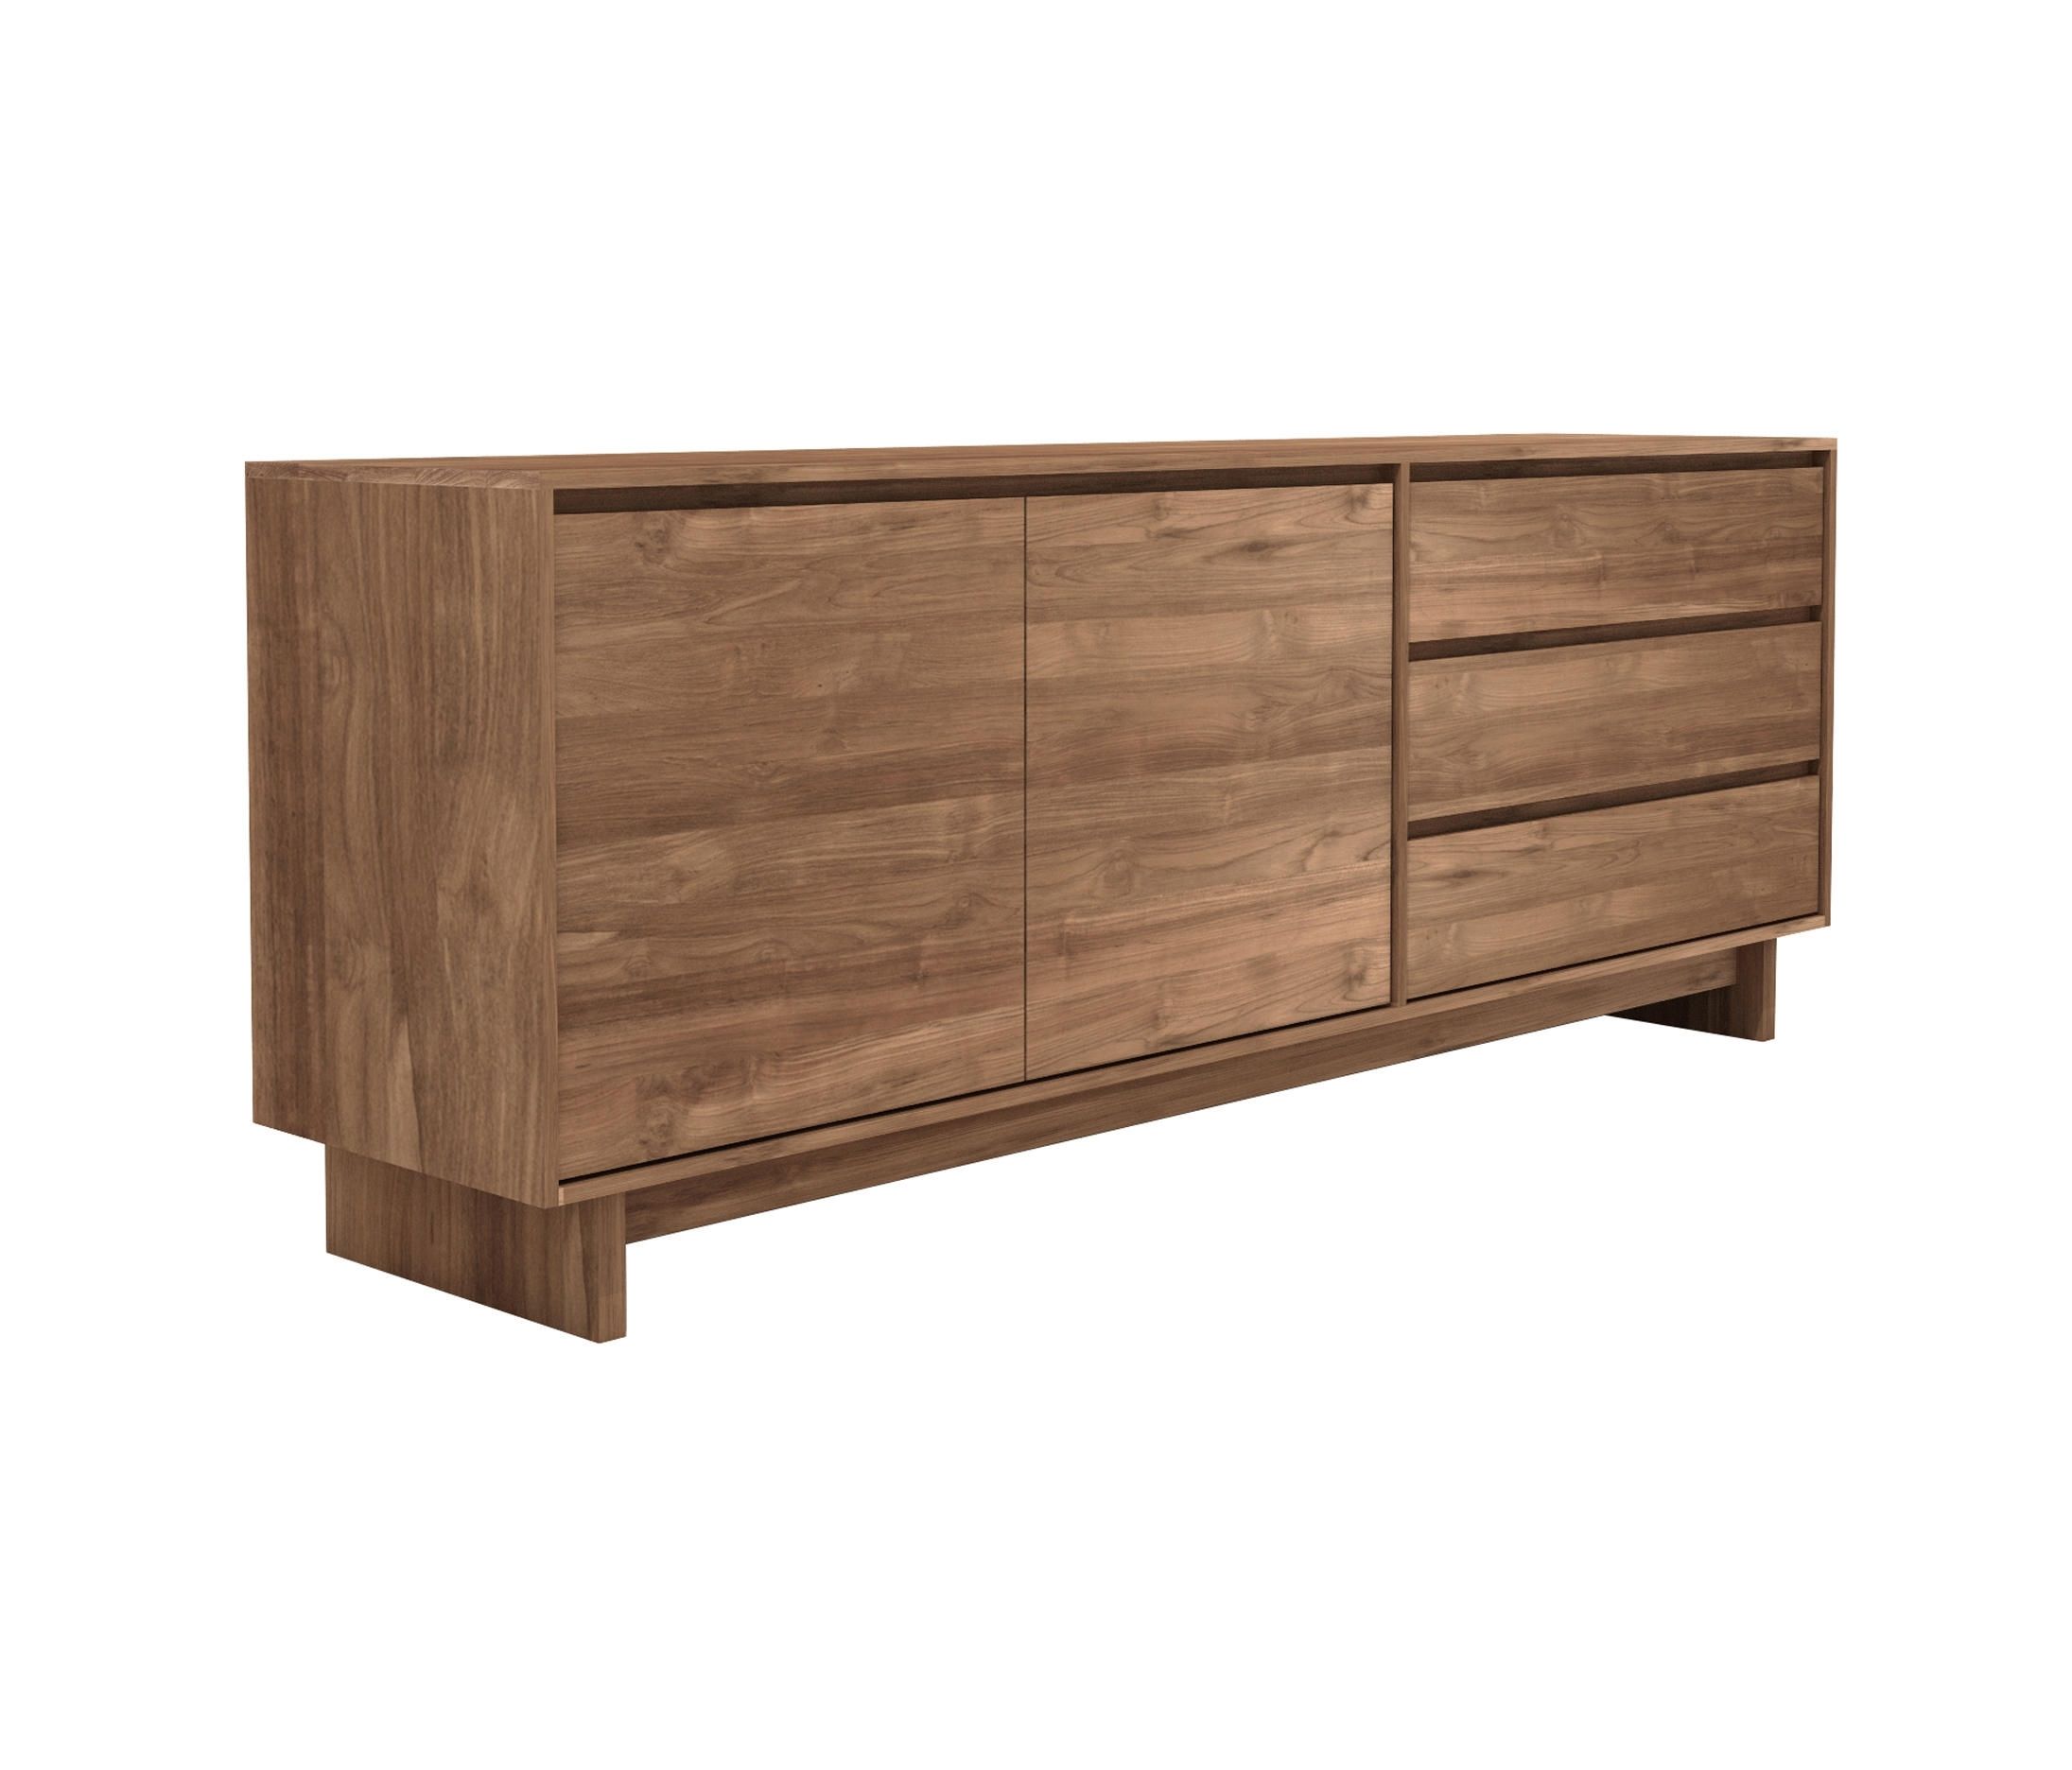 Teak Wave Sideboard – Sideboards From Ethnicraft | Architonic Regarding Current Calhoun Sideboards (Photo 2 of 20)